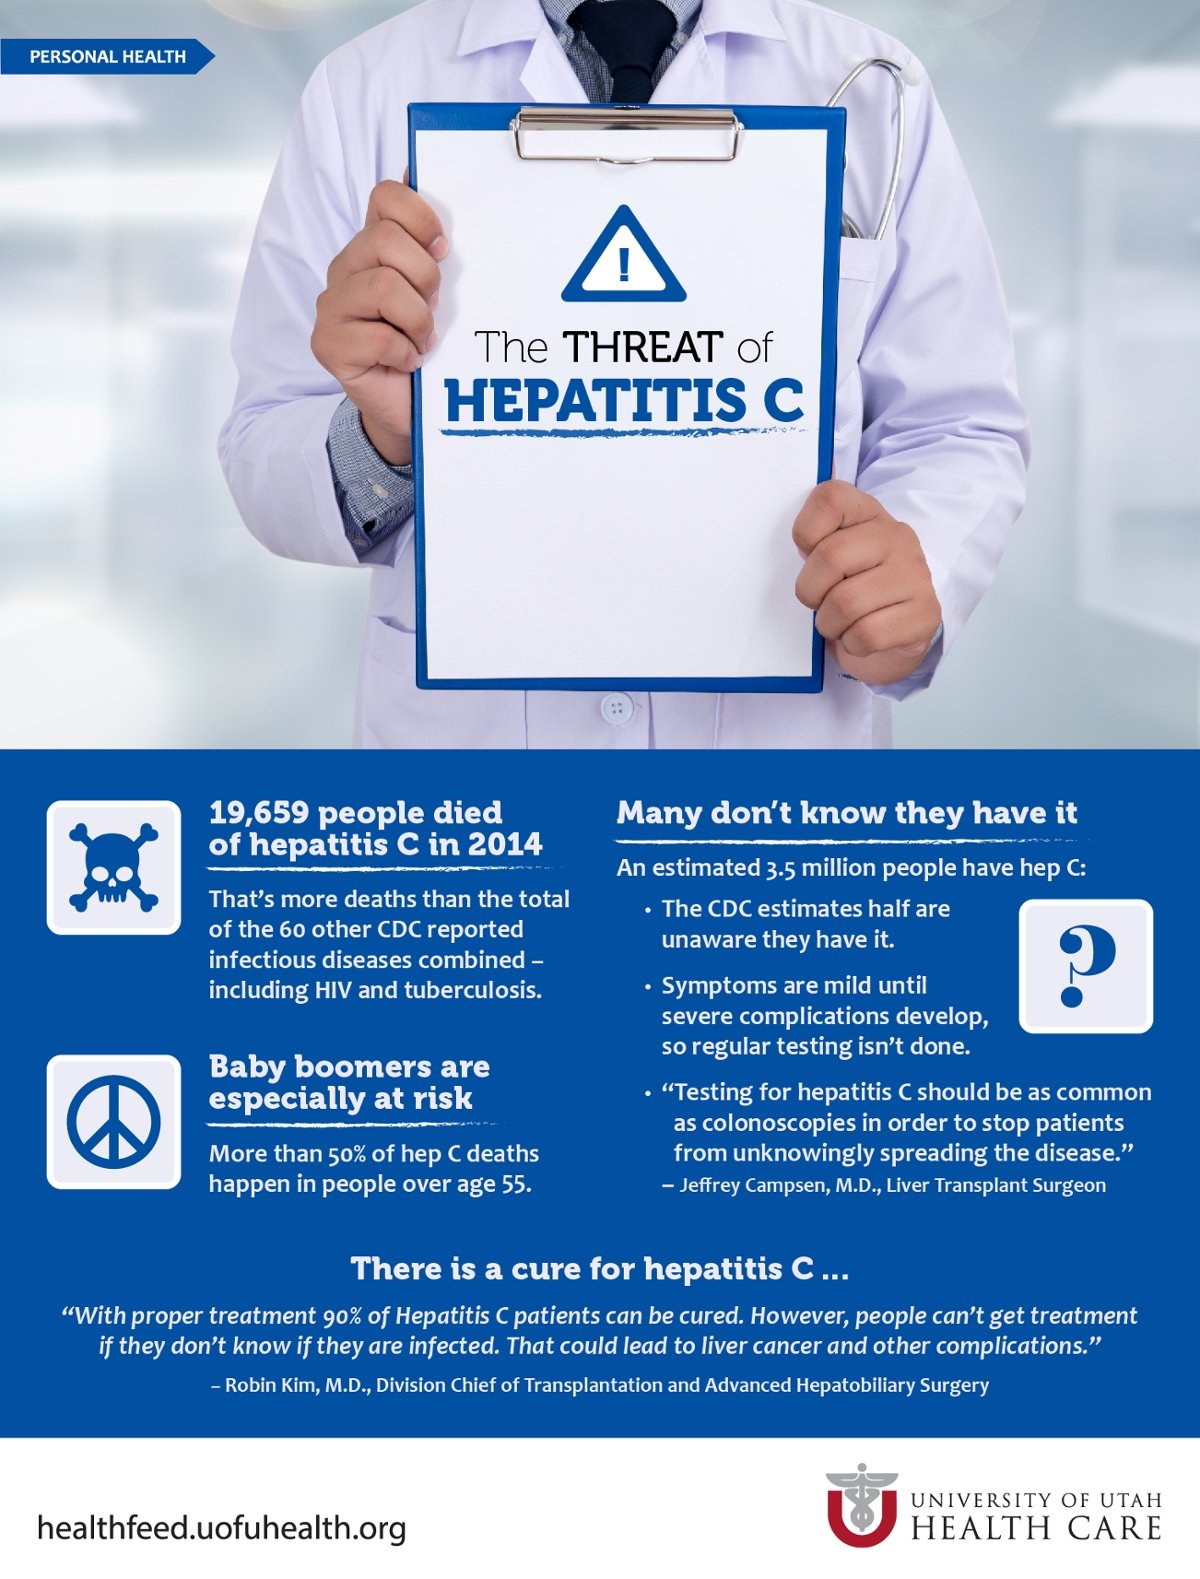 You May Have Hepatitis C and Not Know It